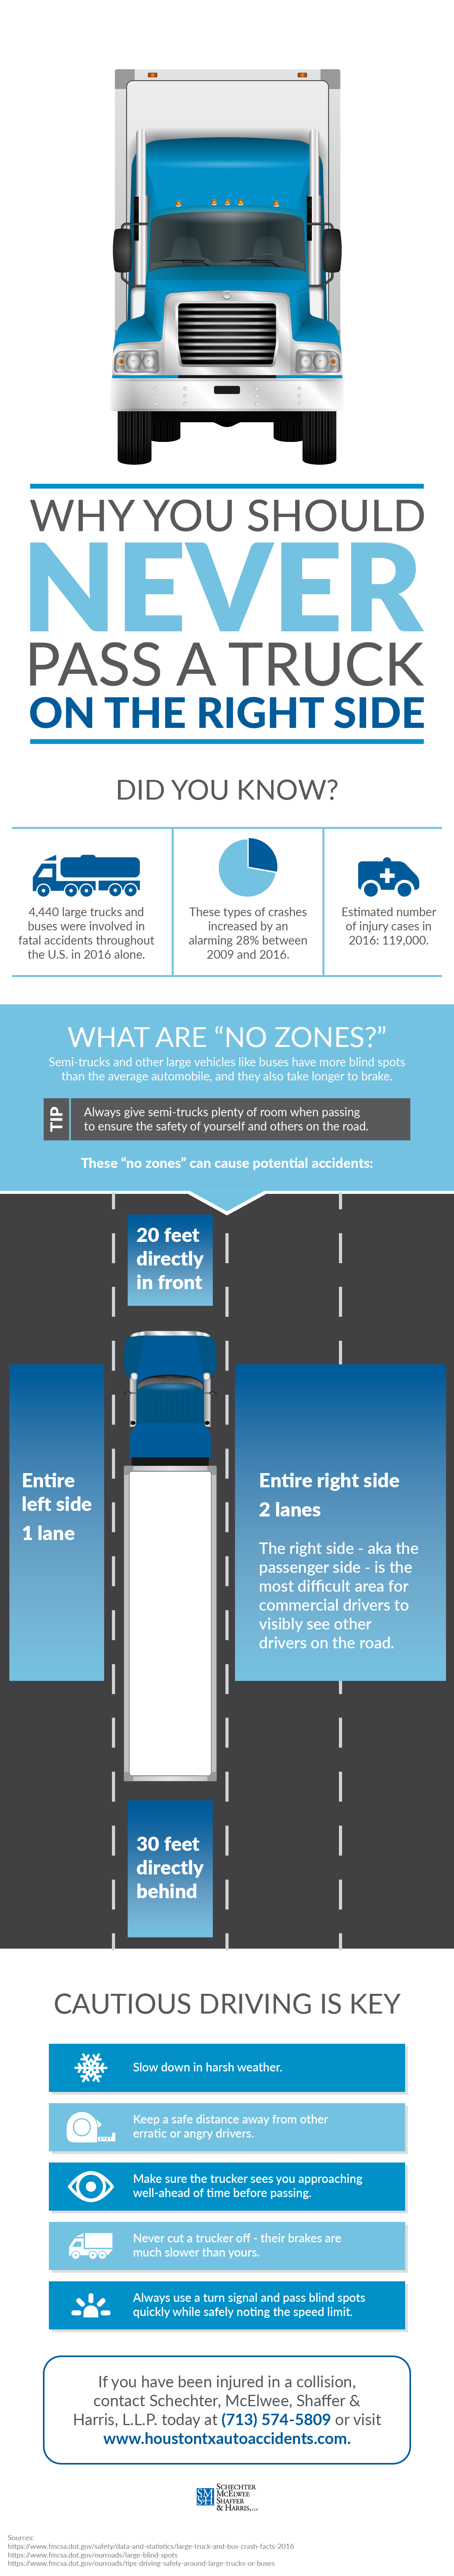 Why You Should Never Pass a Truck on the Right Side Infographic